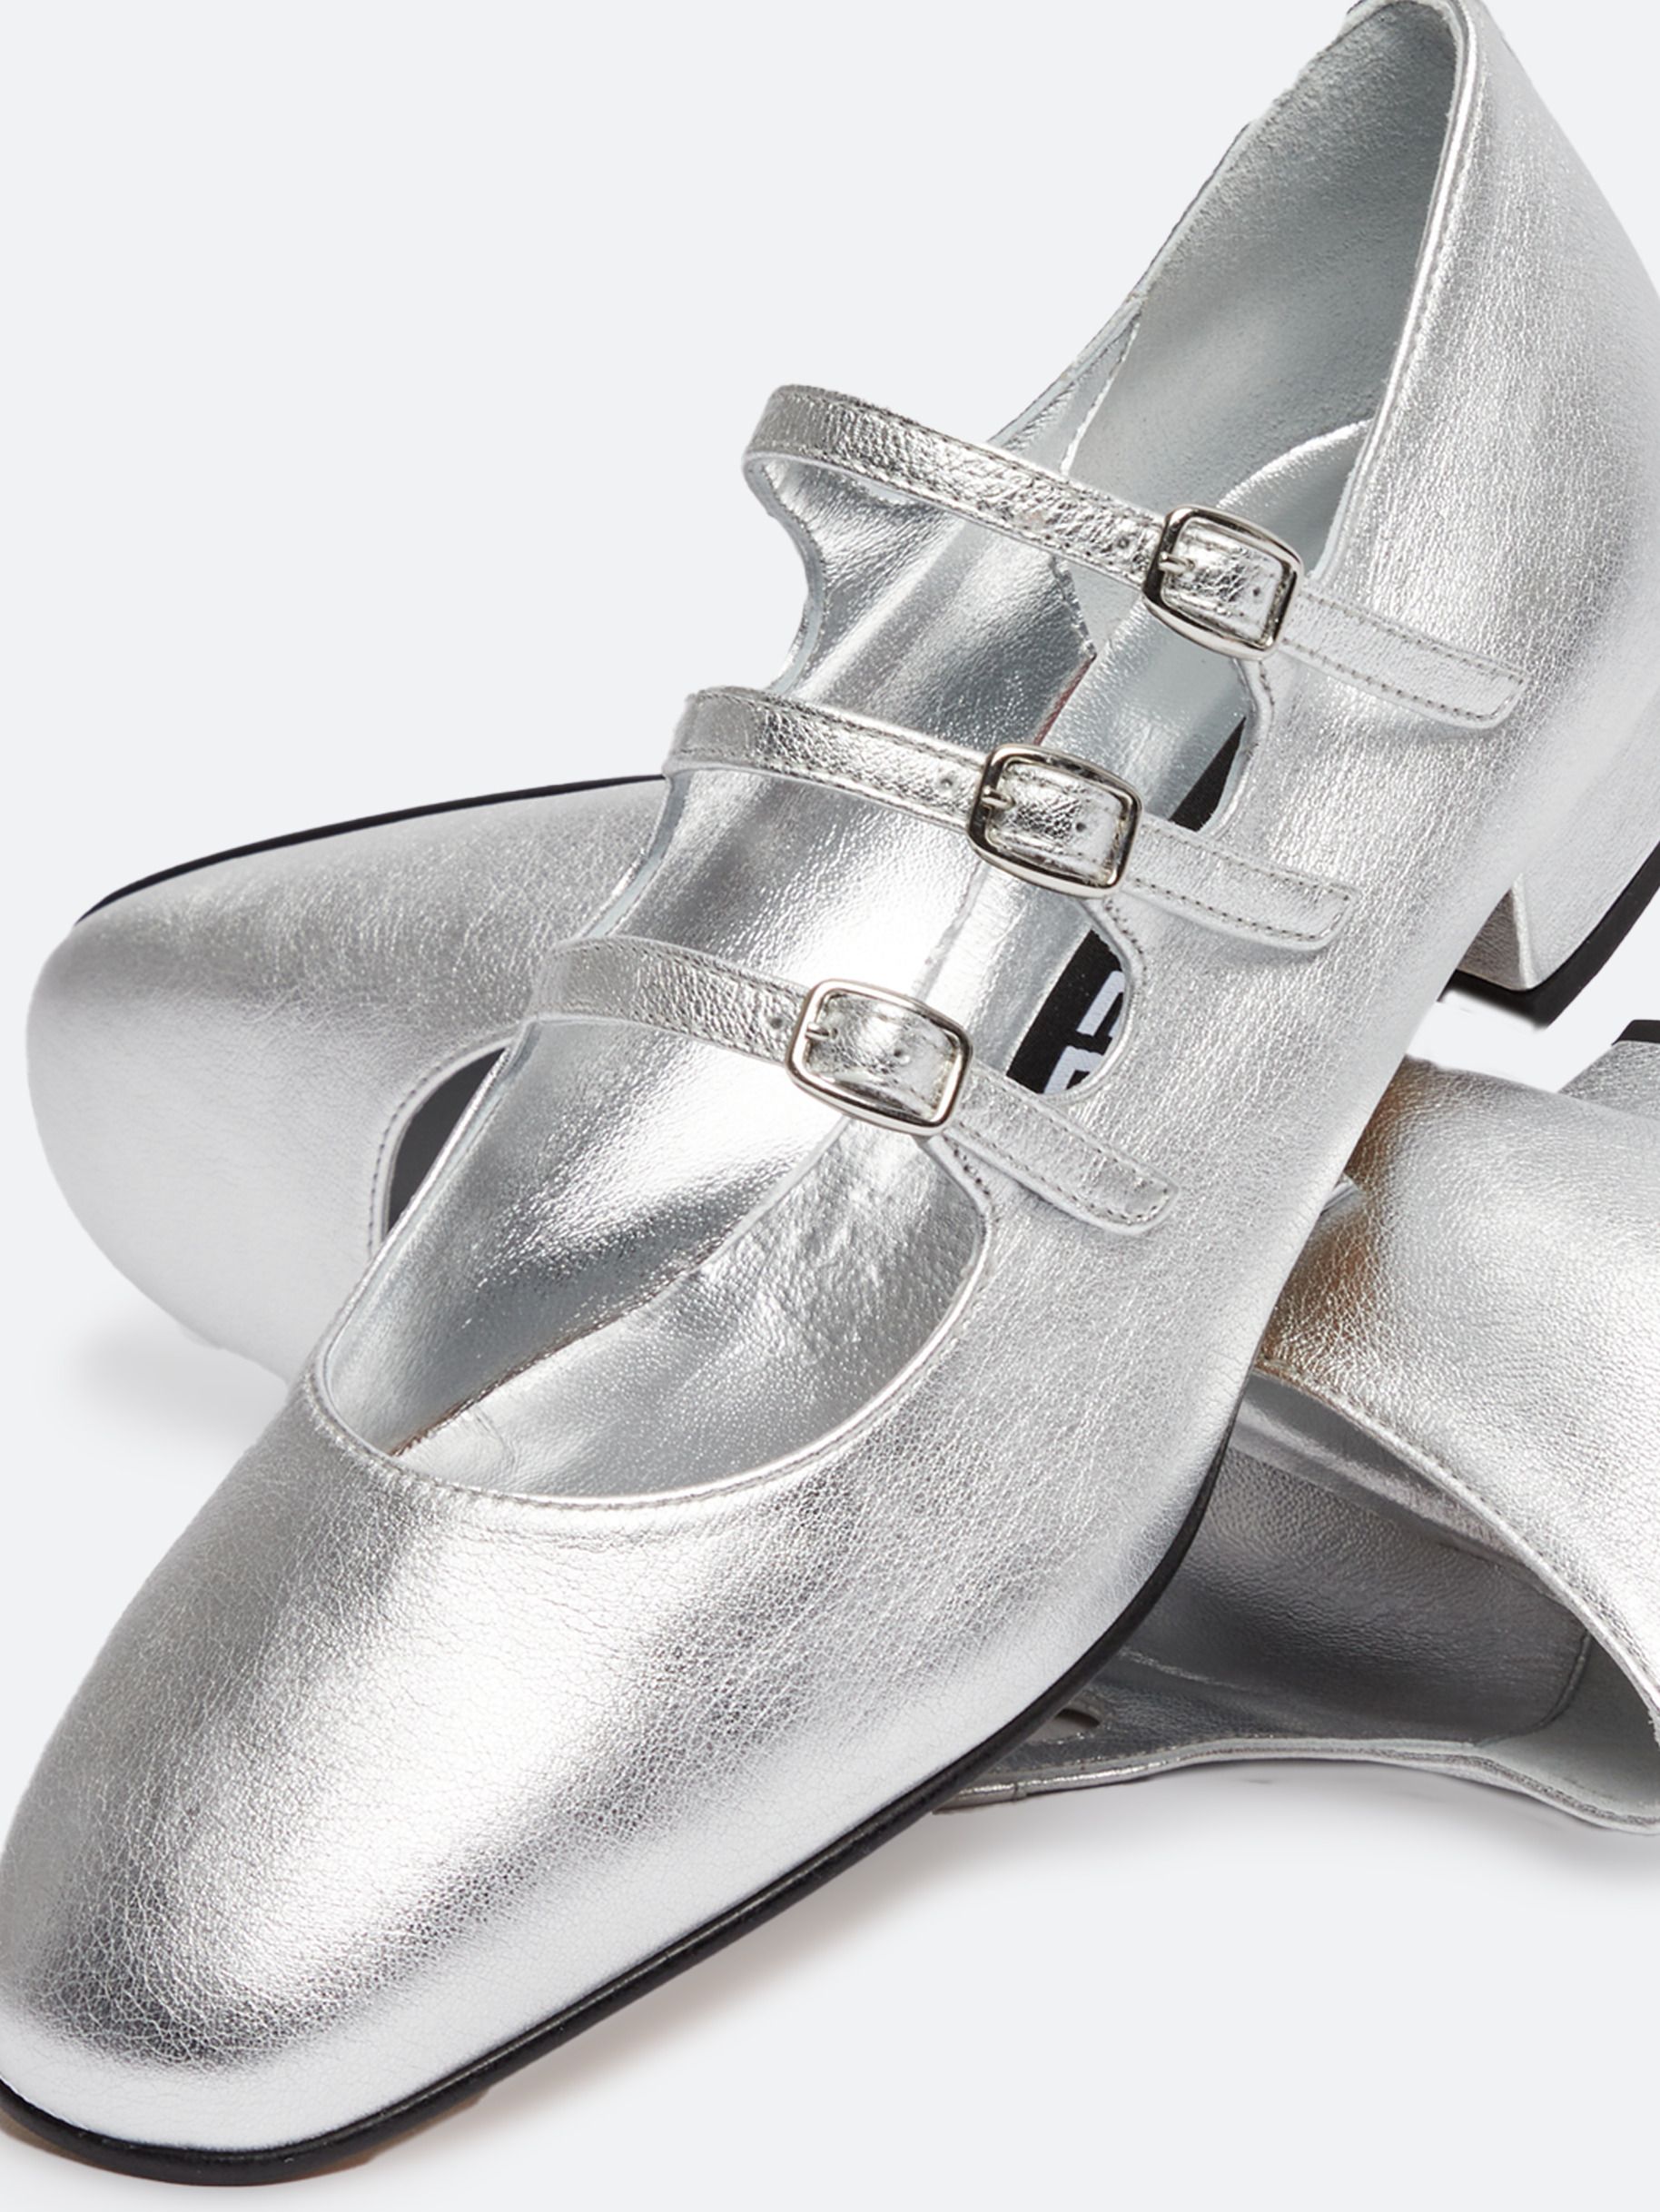 Laminated silver leather Mary Janes| Carel Paris Shoes